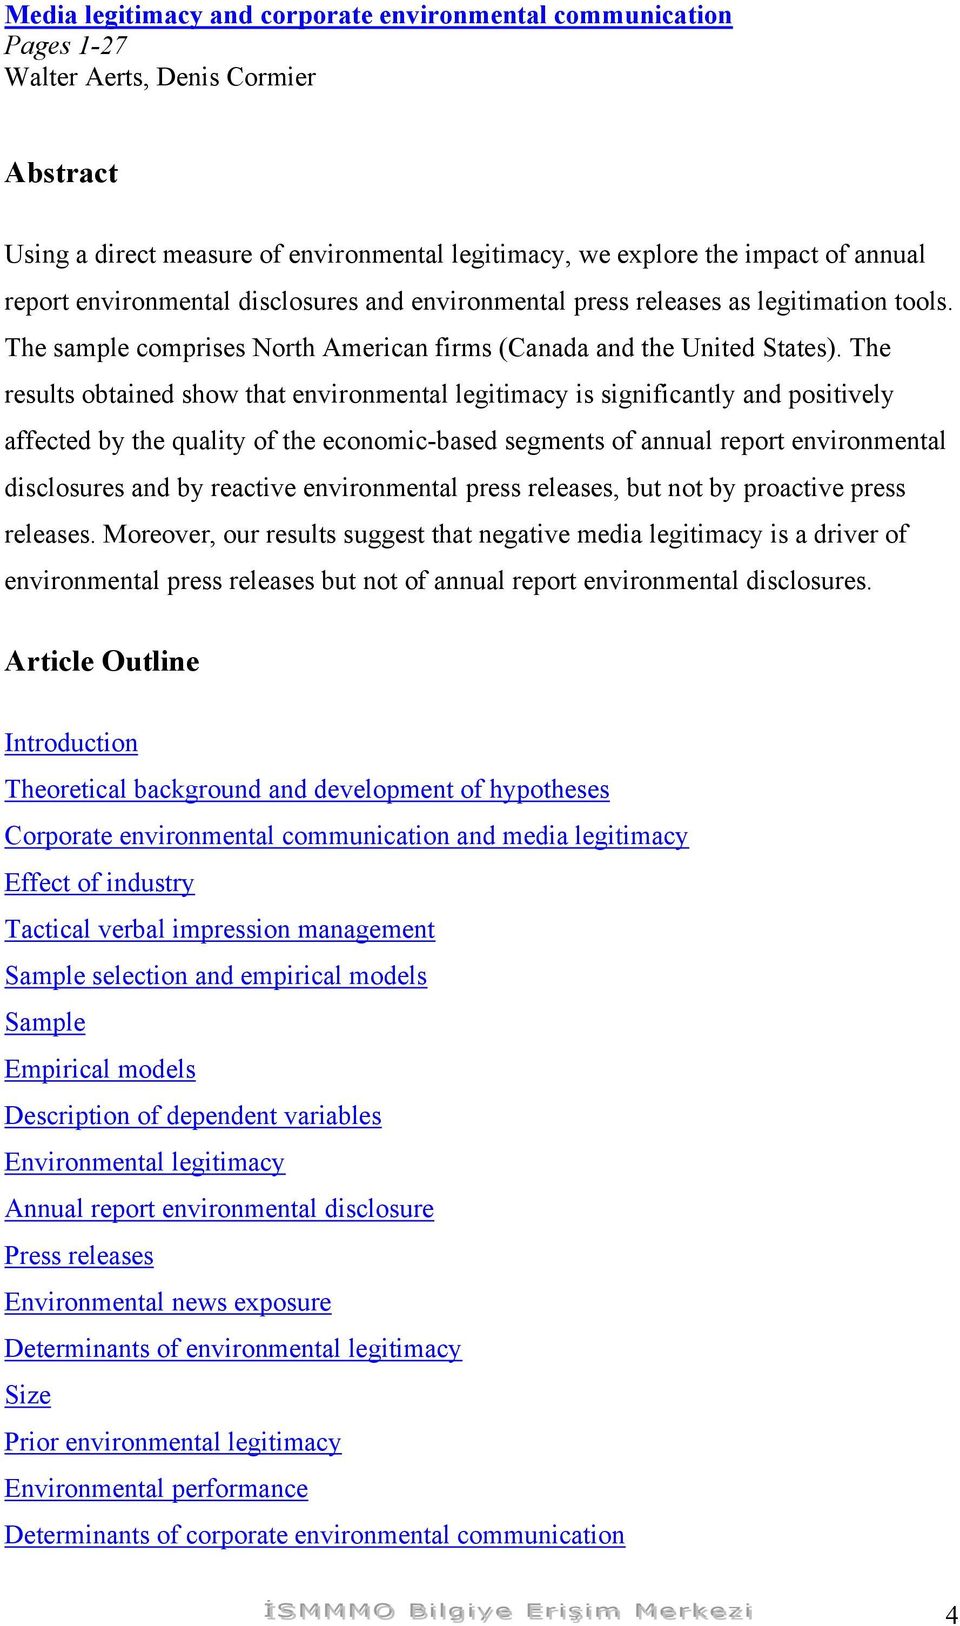 The results obtained show that environmental legitimacy is significantly and positively affected by the quality of the economic-based segments of annual report environmental disclosures and by